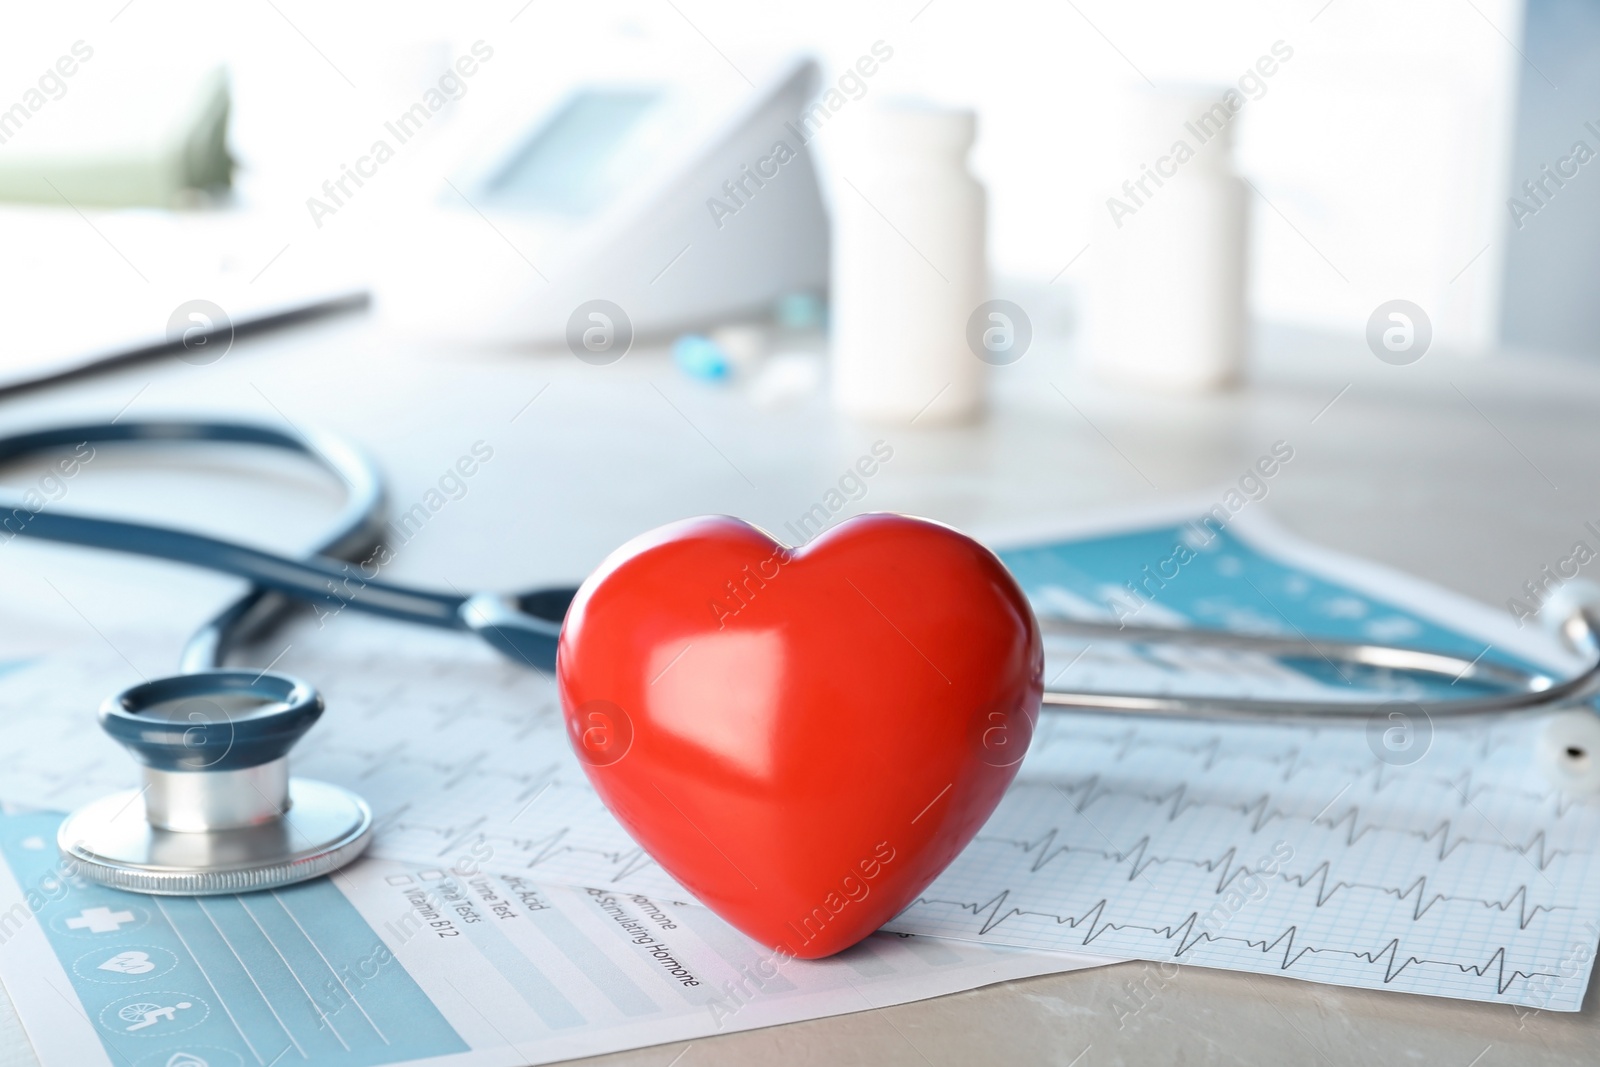 Photo of Stethoscope and heart model on table. Cardiology service